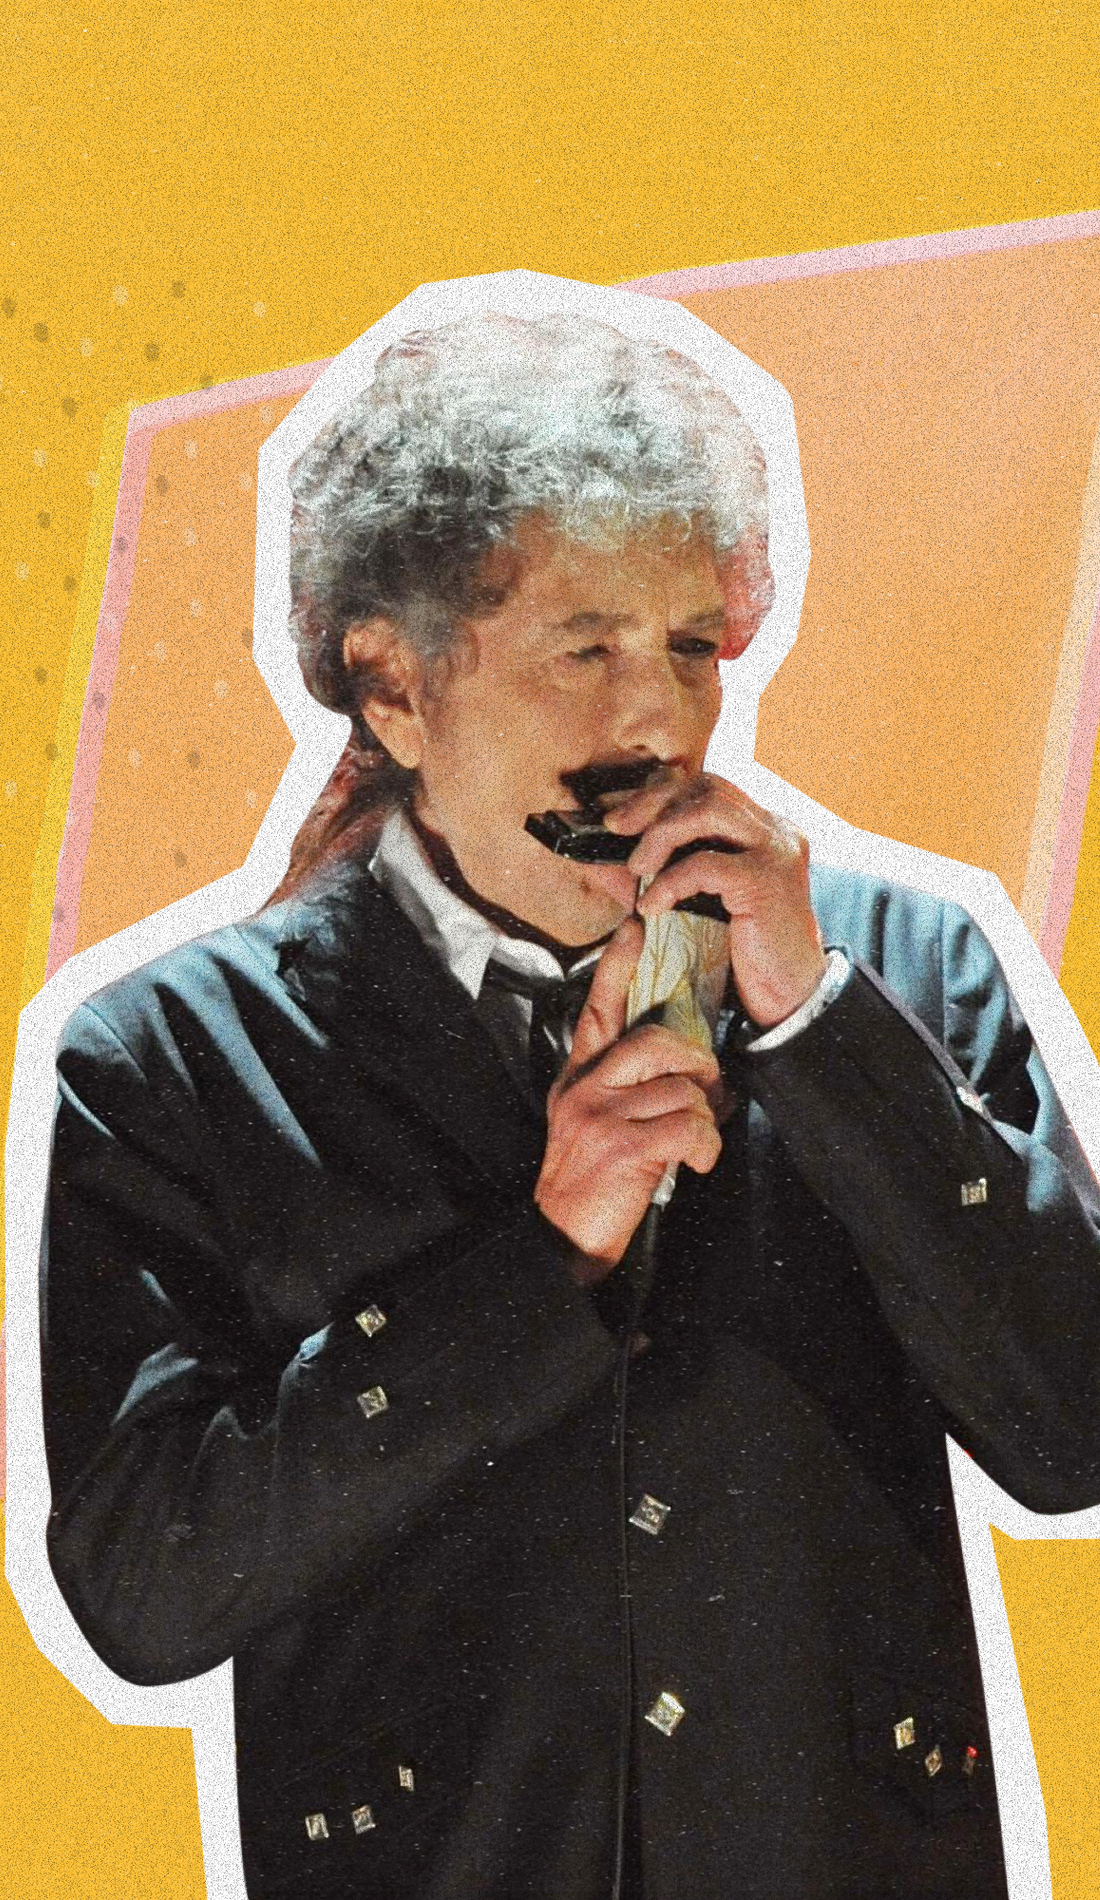 Bob Dylan Tickets — Never Ending Tour 2020 and Tour Dates SeatGeek